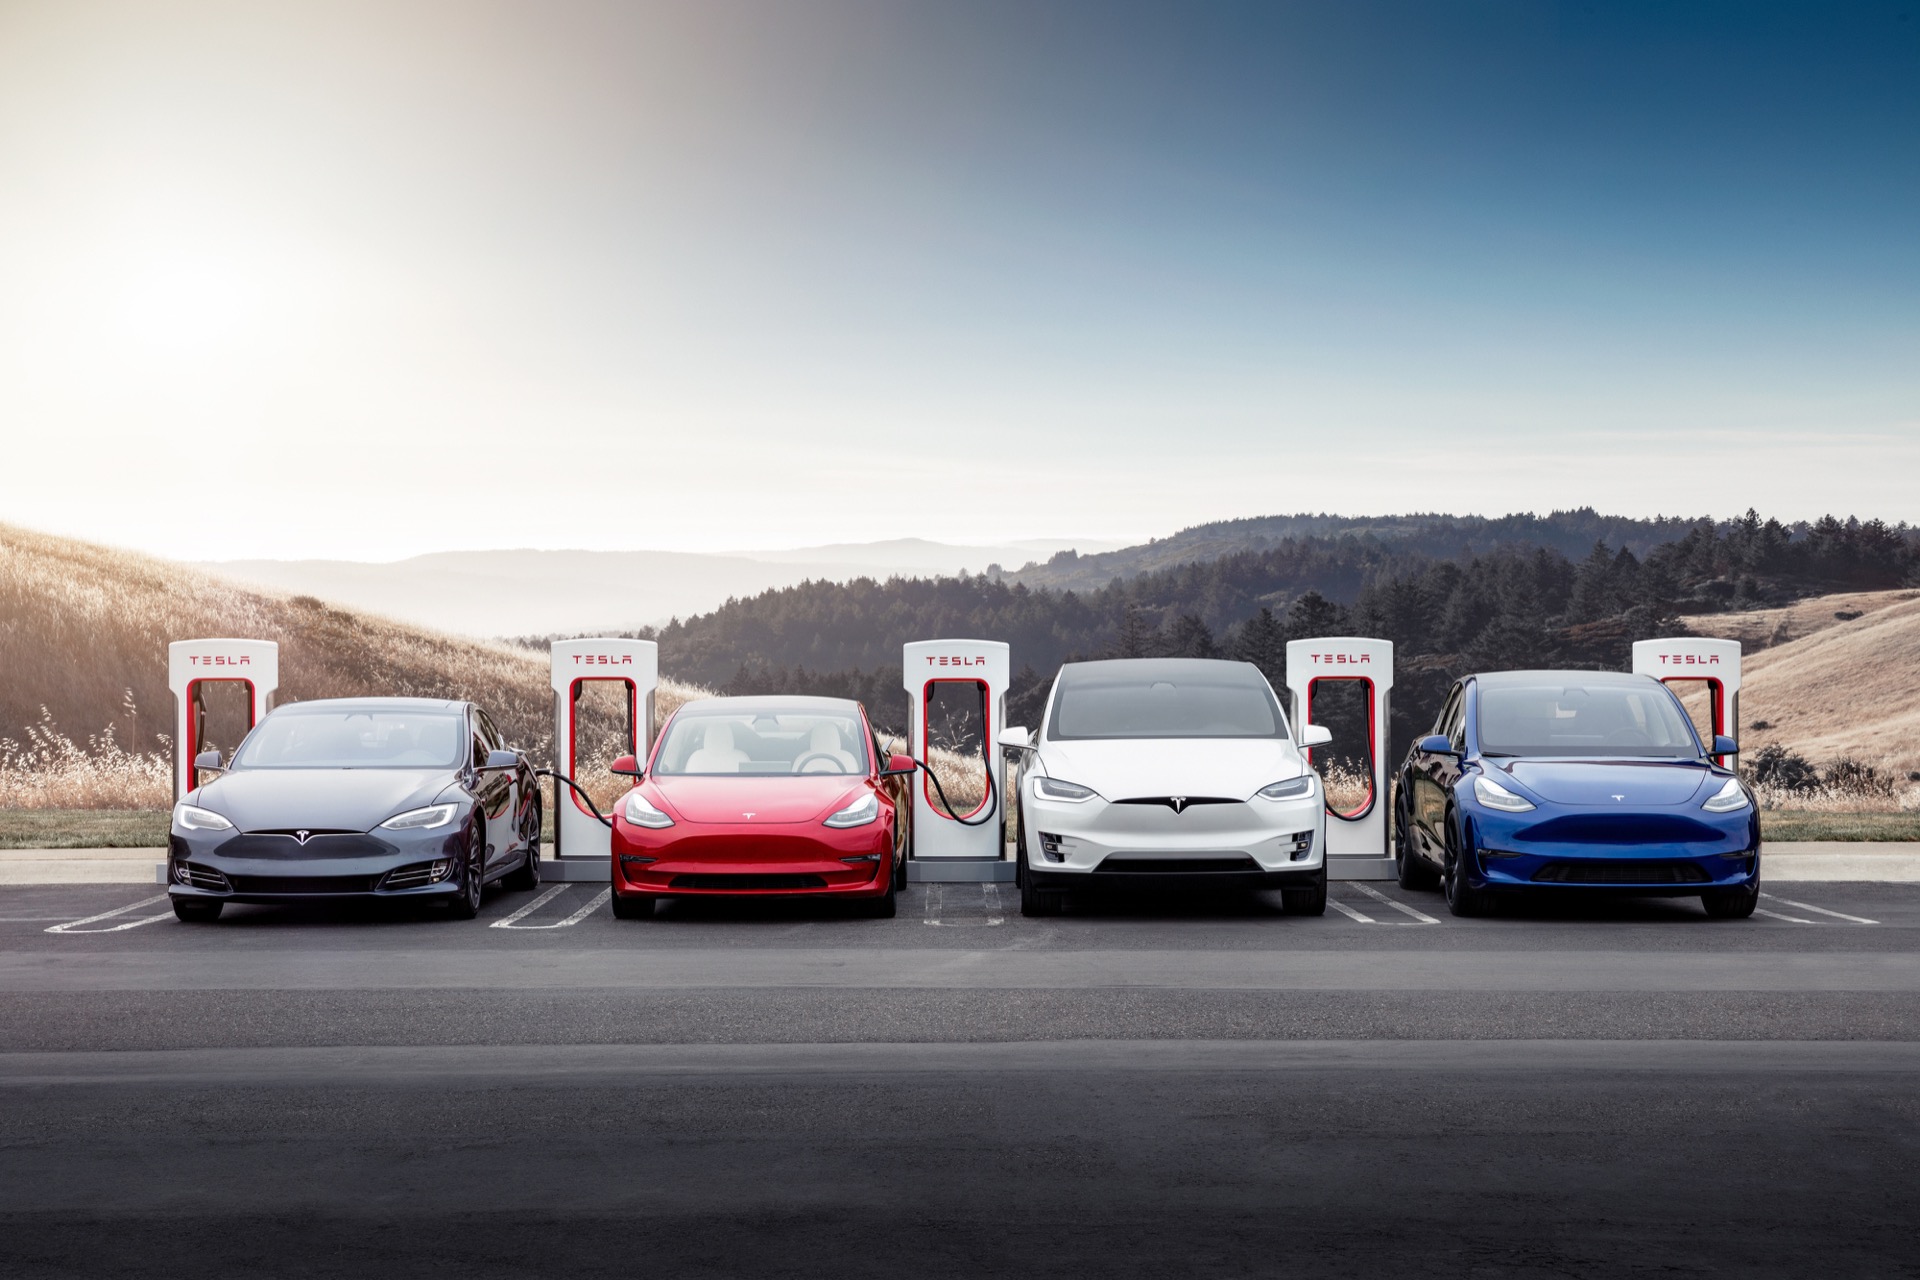 Tesla has made 5 million EVs globally, the most of any automaker